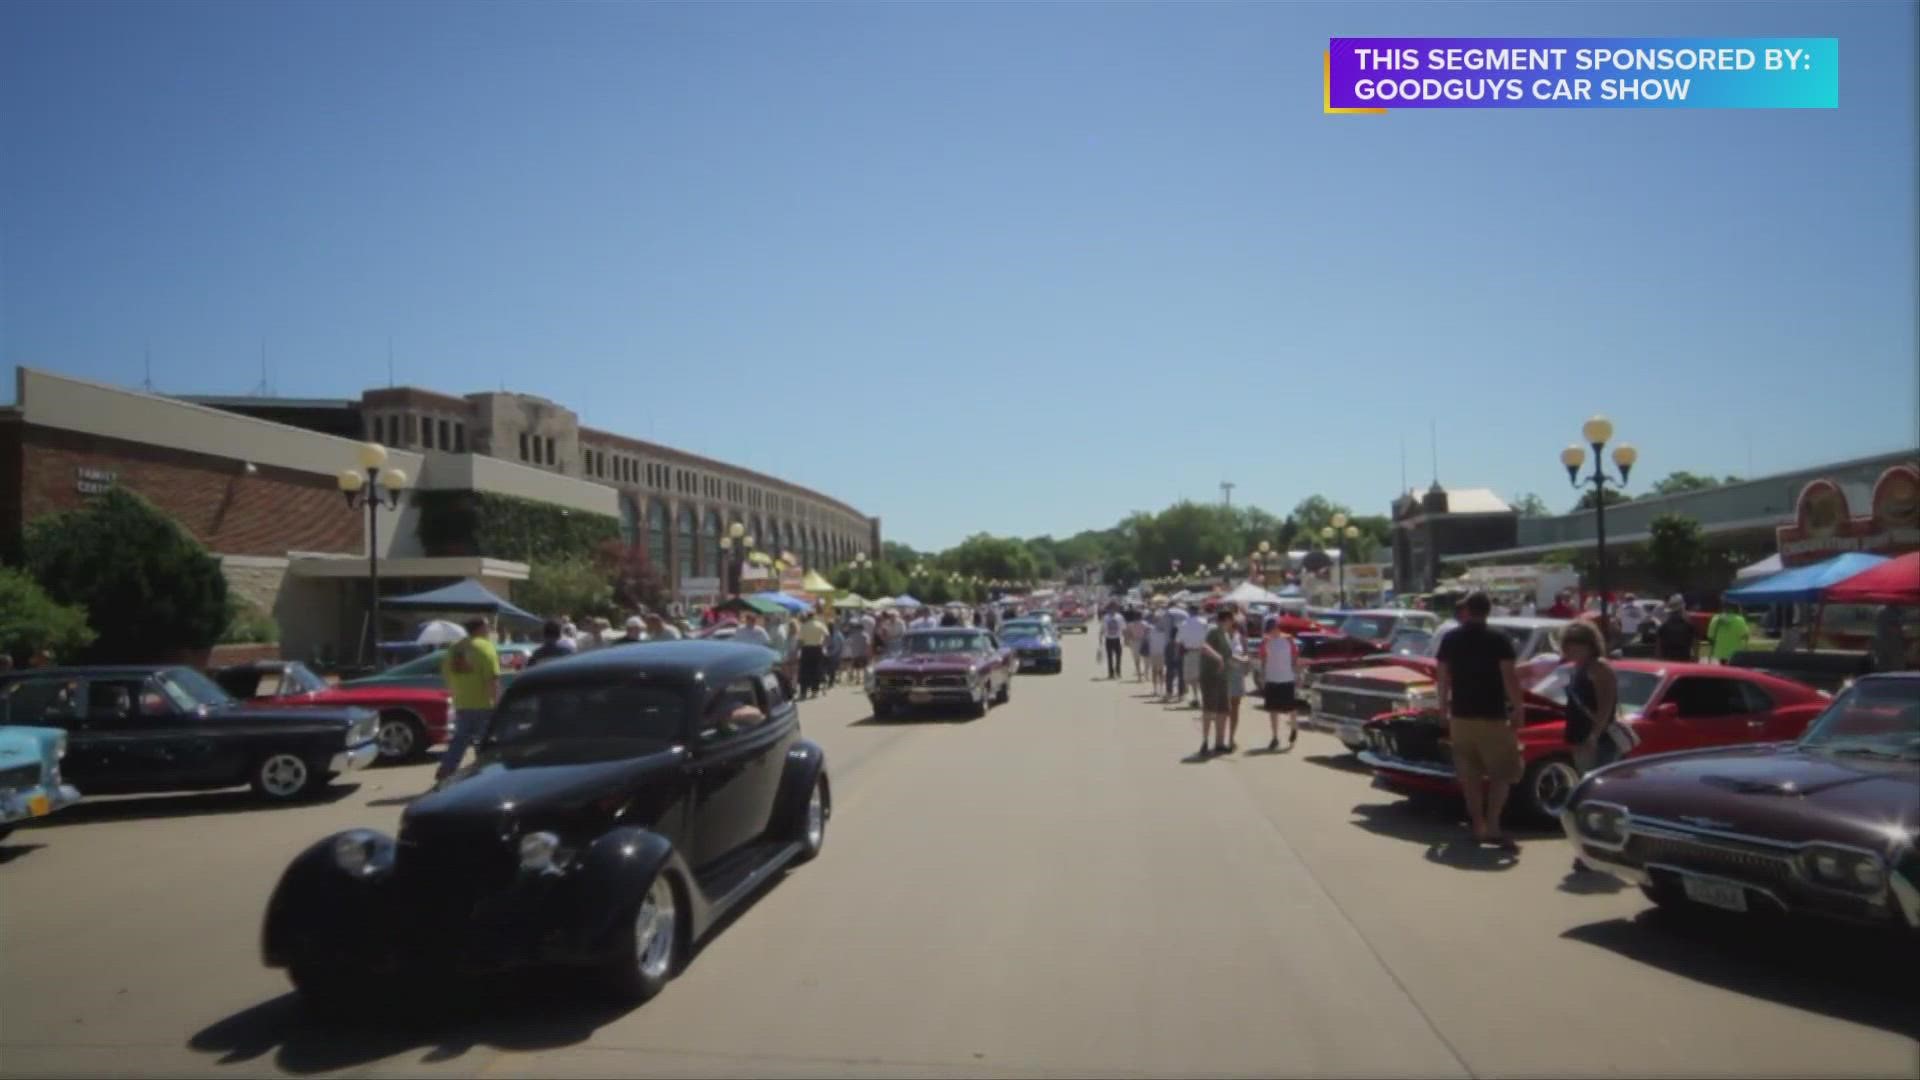 Stephanie Schoennagel, Marketing Manager-GOODGUYS Heartland Nationals, says they are expecting a record crowd this year w/ over 5000 vehicles expected | Paid Content